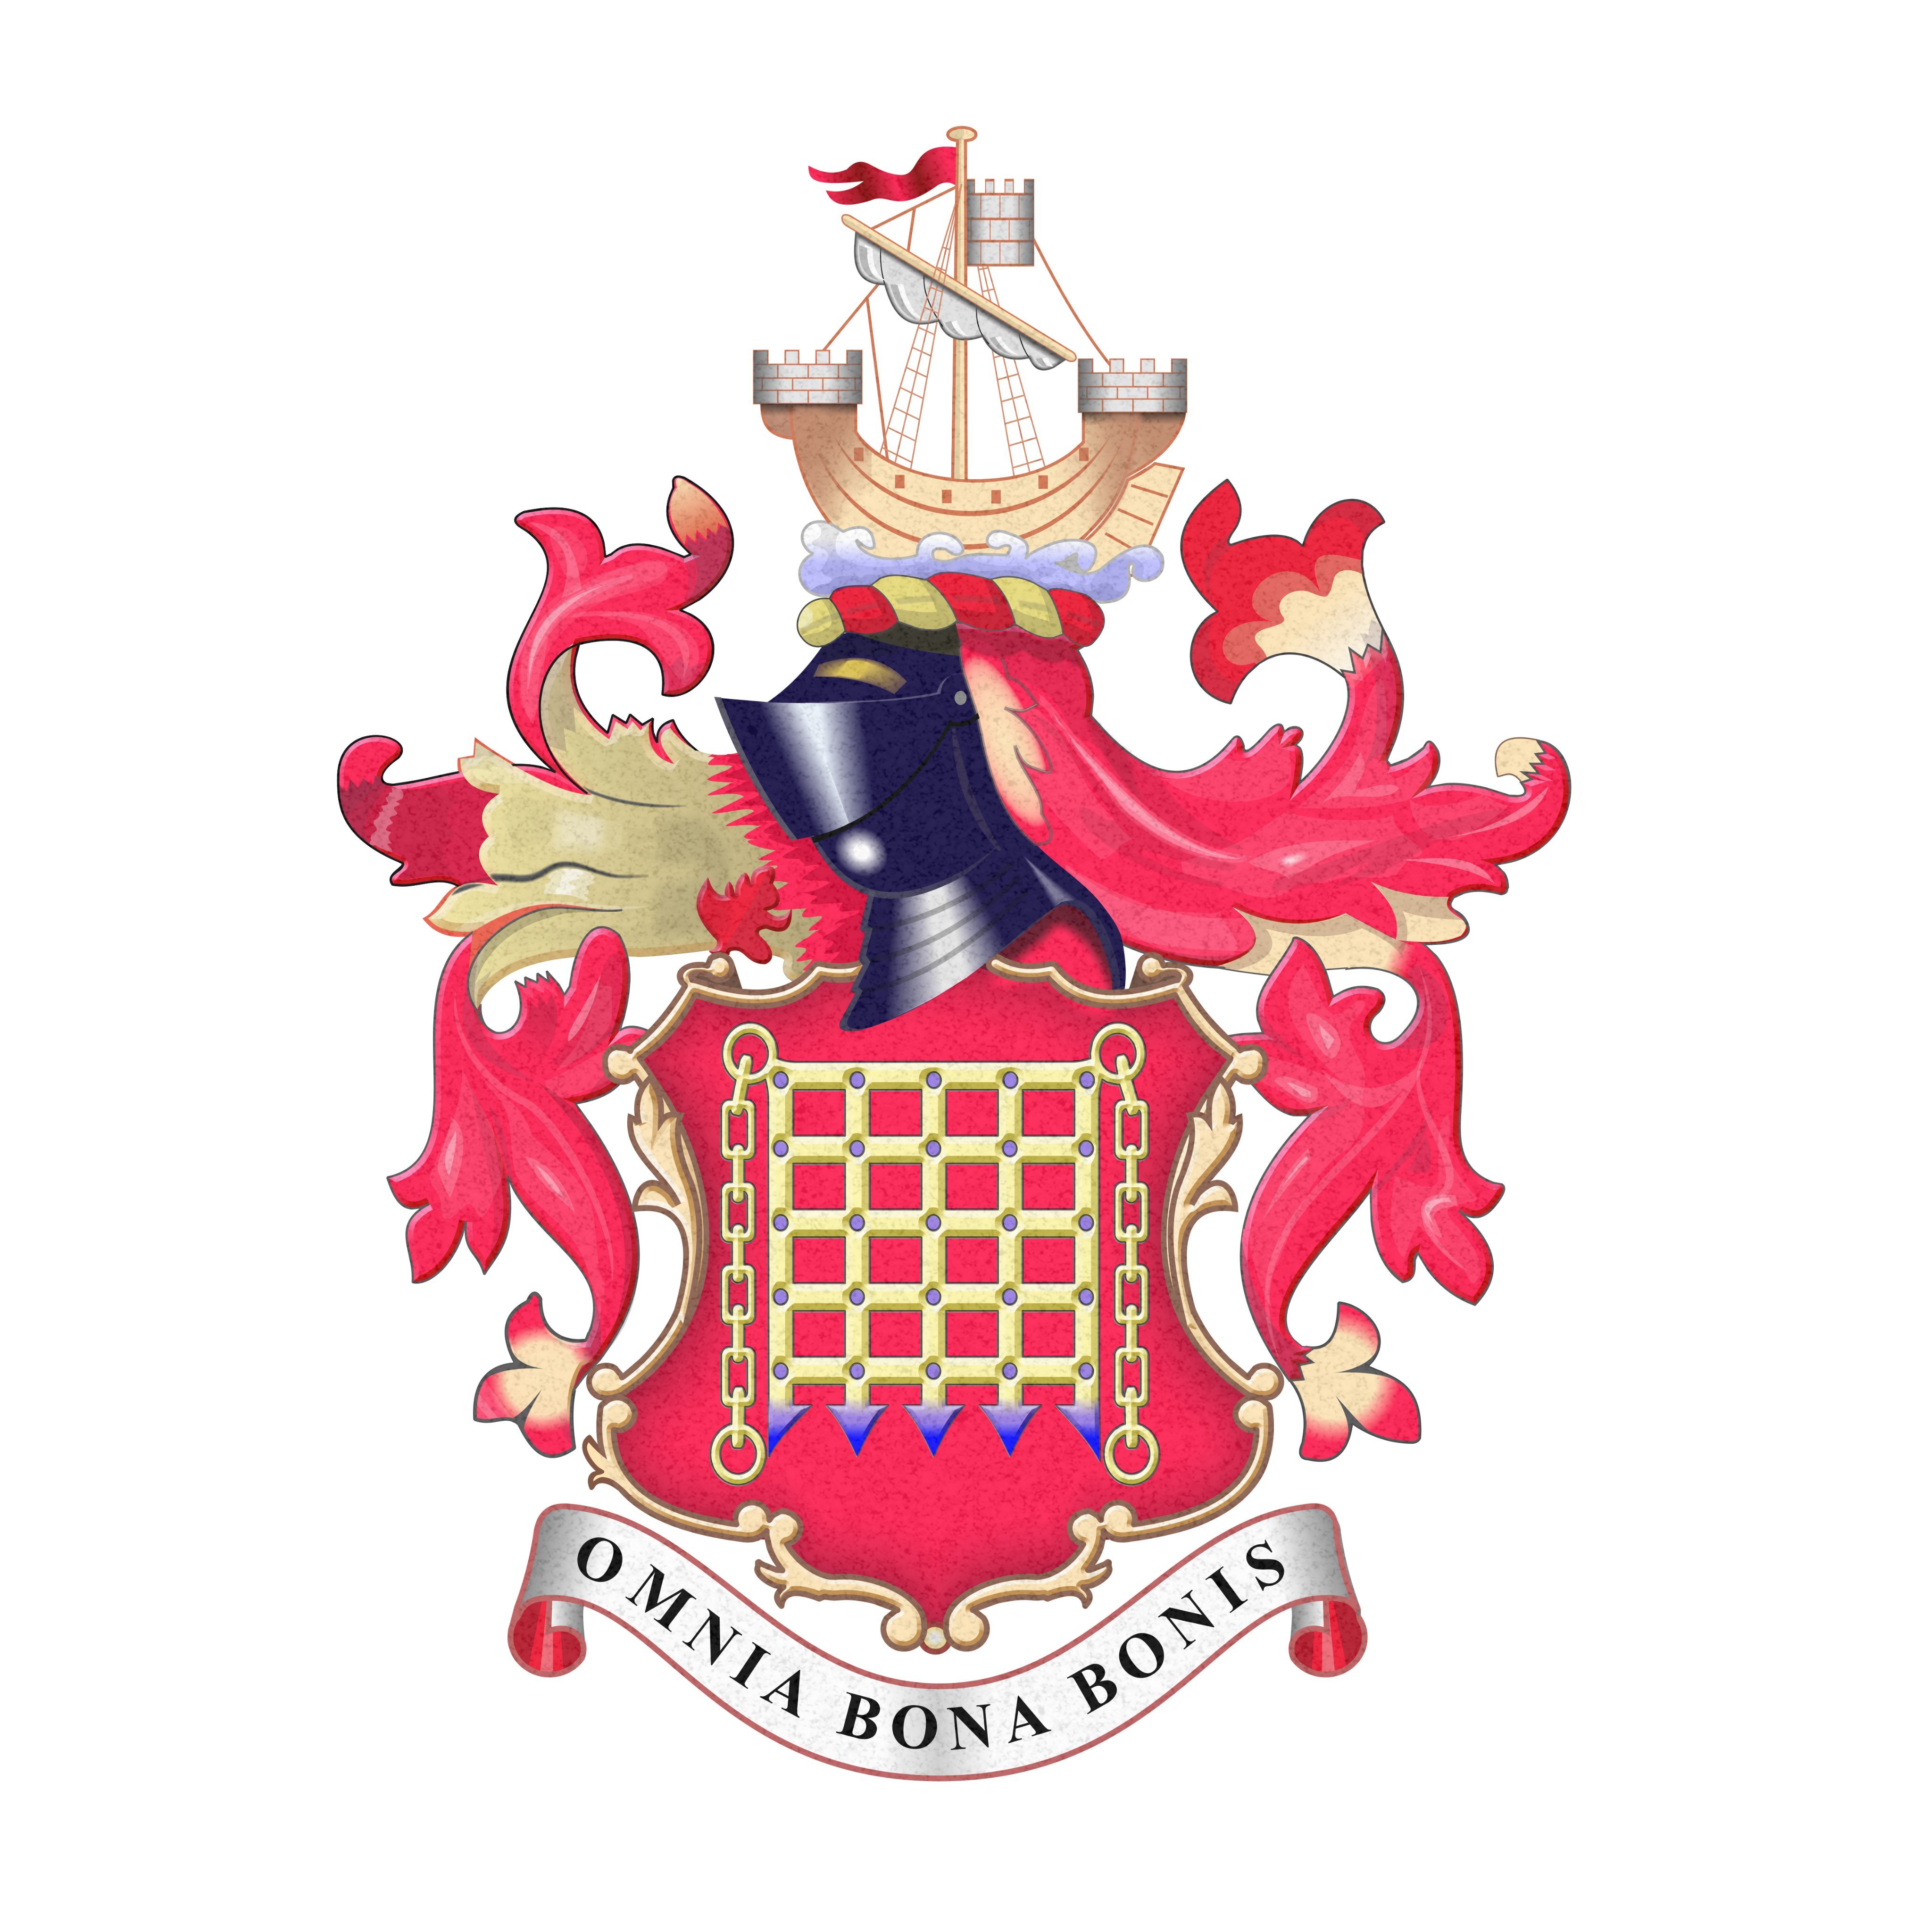 Harwich Town Council, The Guildhall, Church Street, Harwich, Essex CO12 3DS https://t.co/l4QV3t3RZy